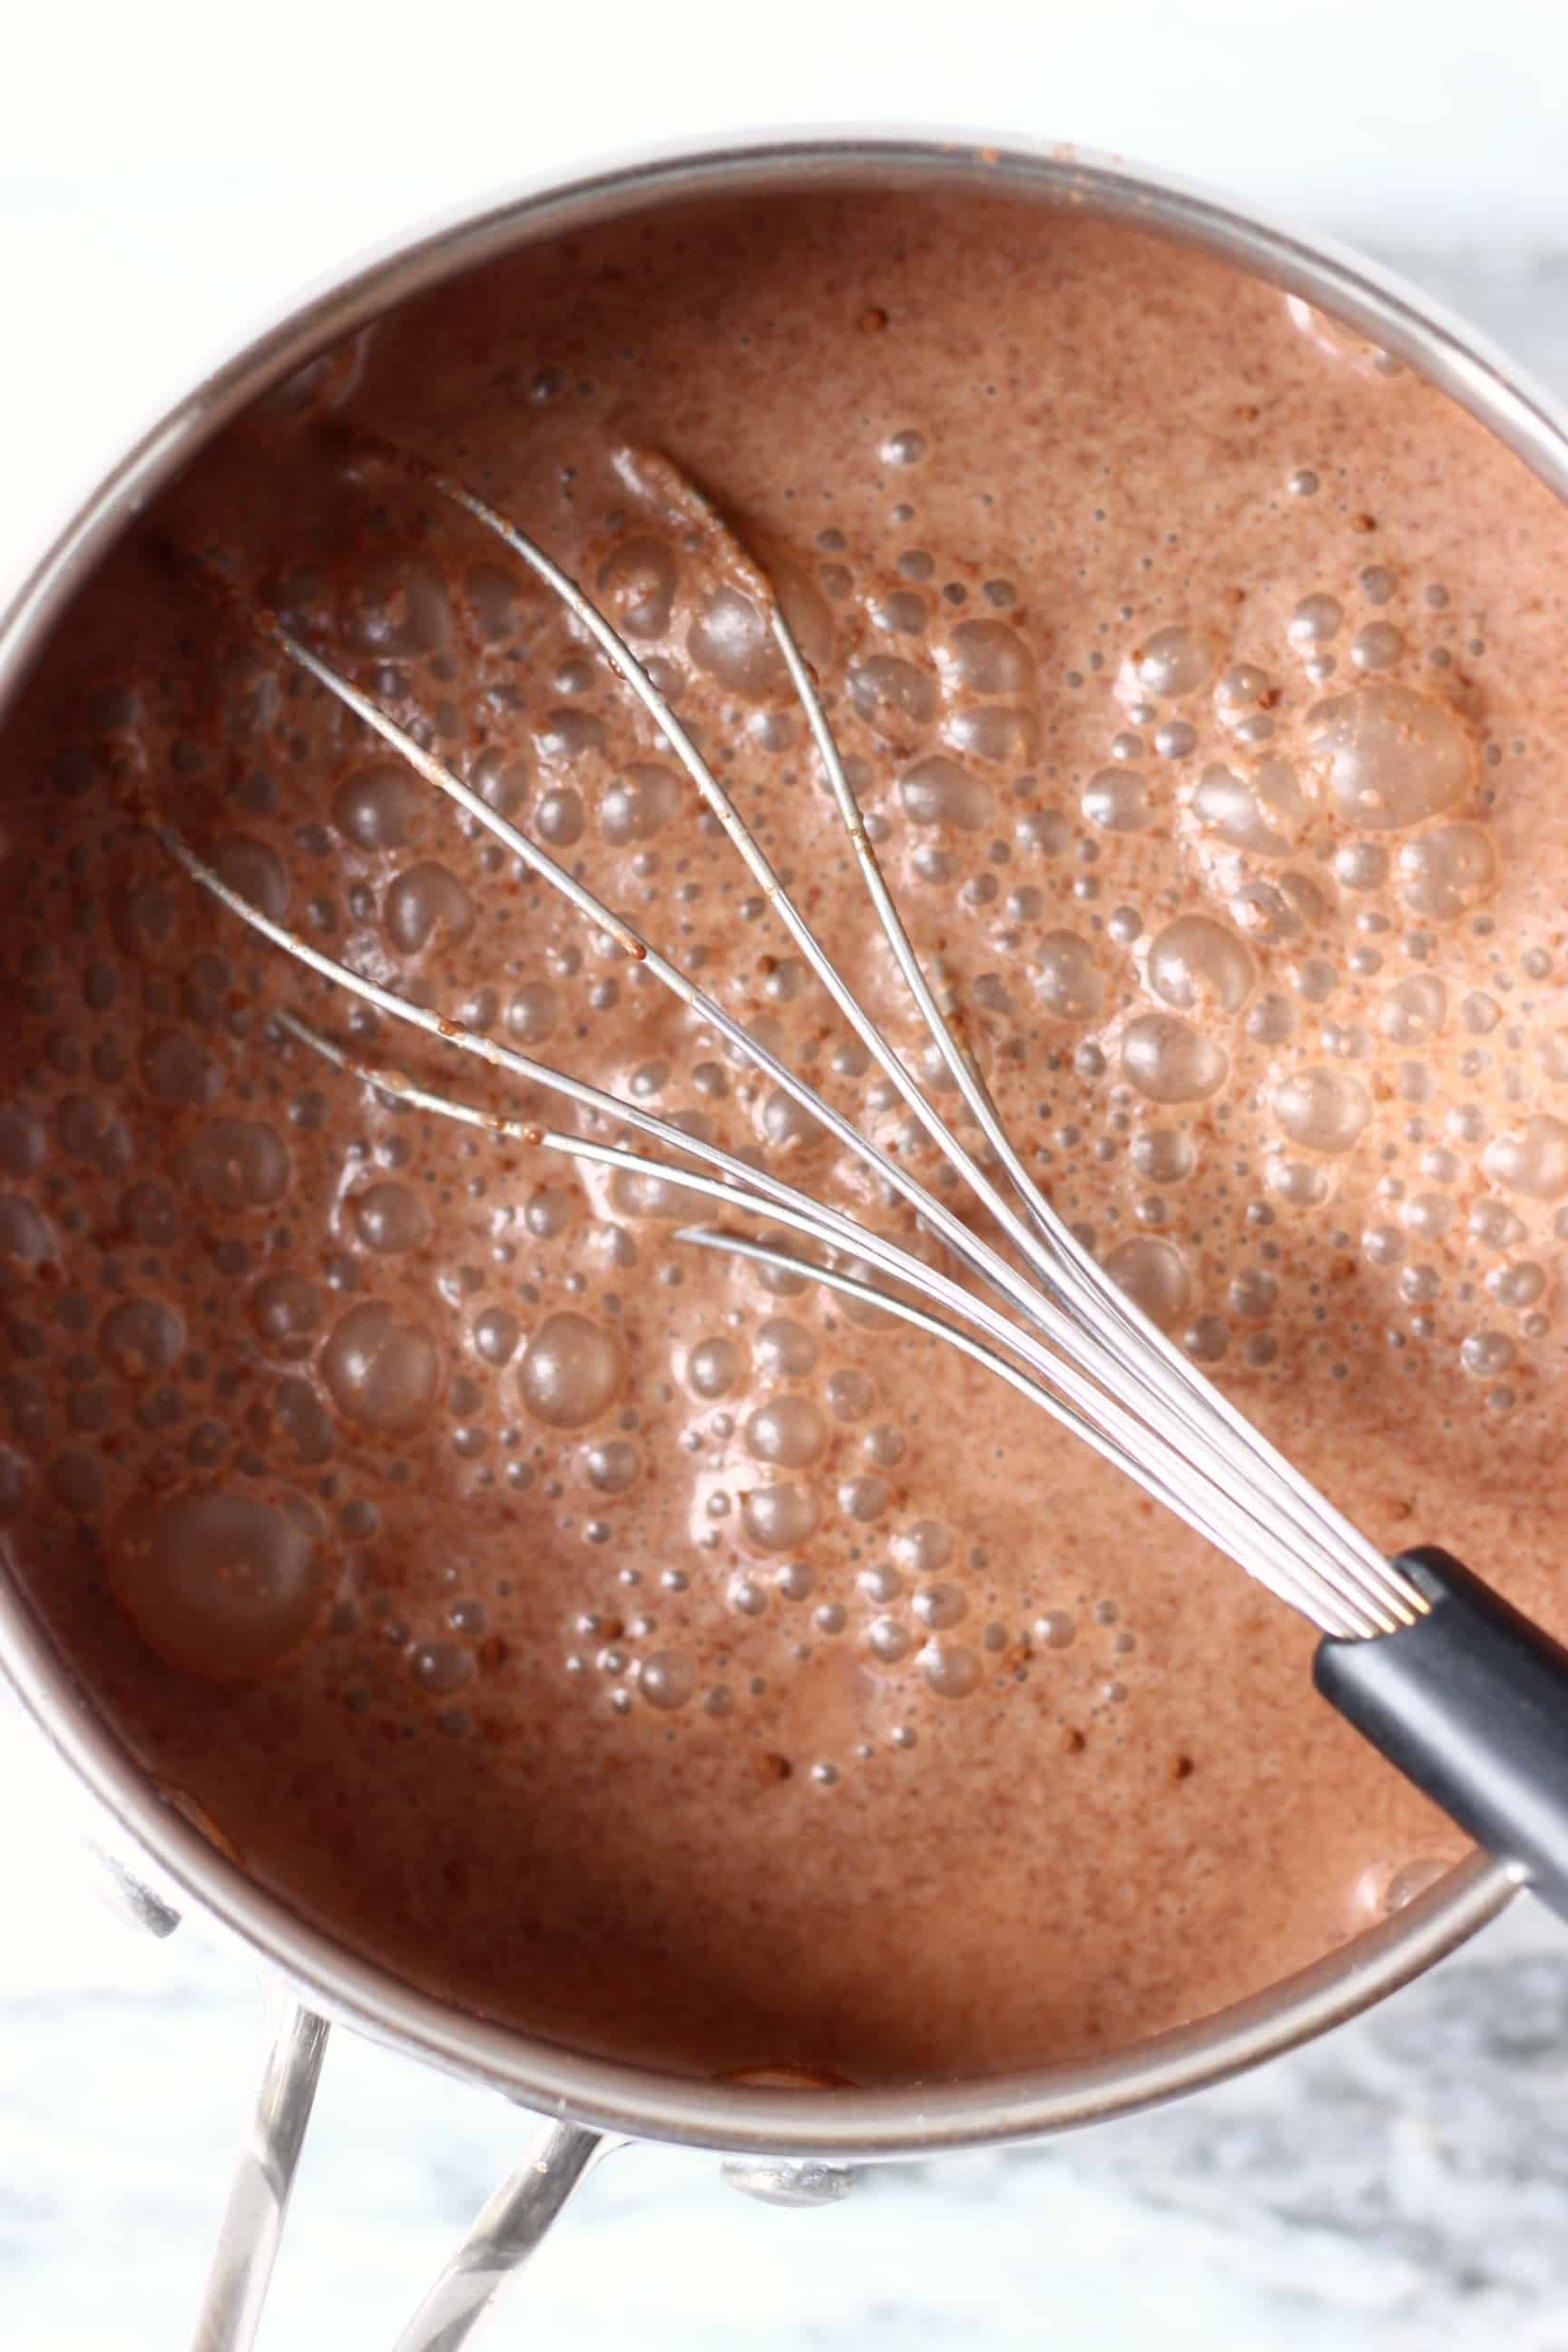 Vegan chocolate custard being made in a pan with a whisk